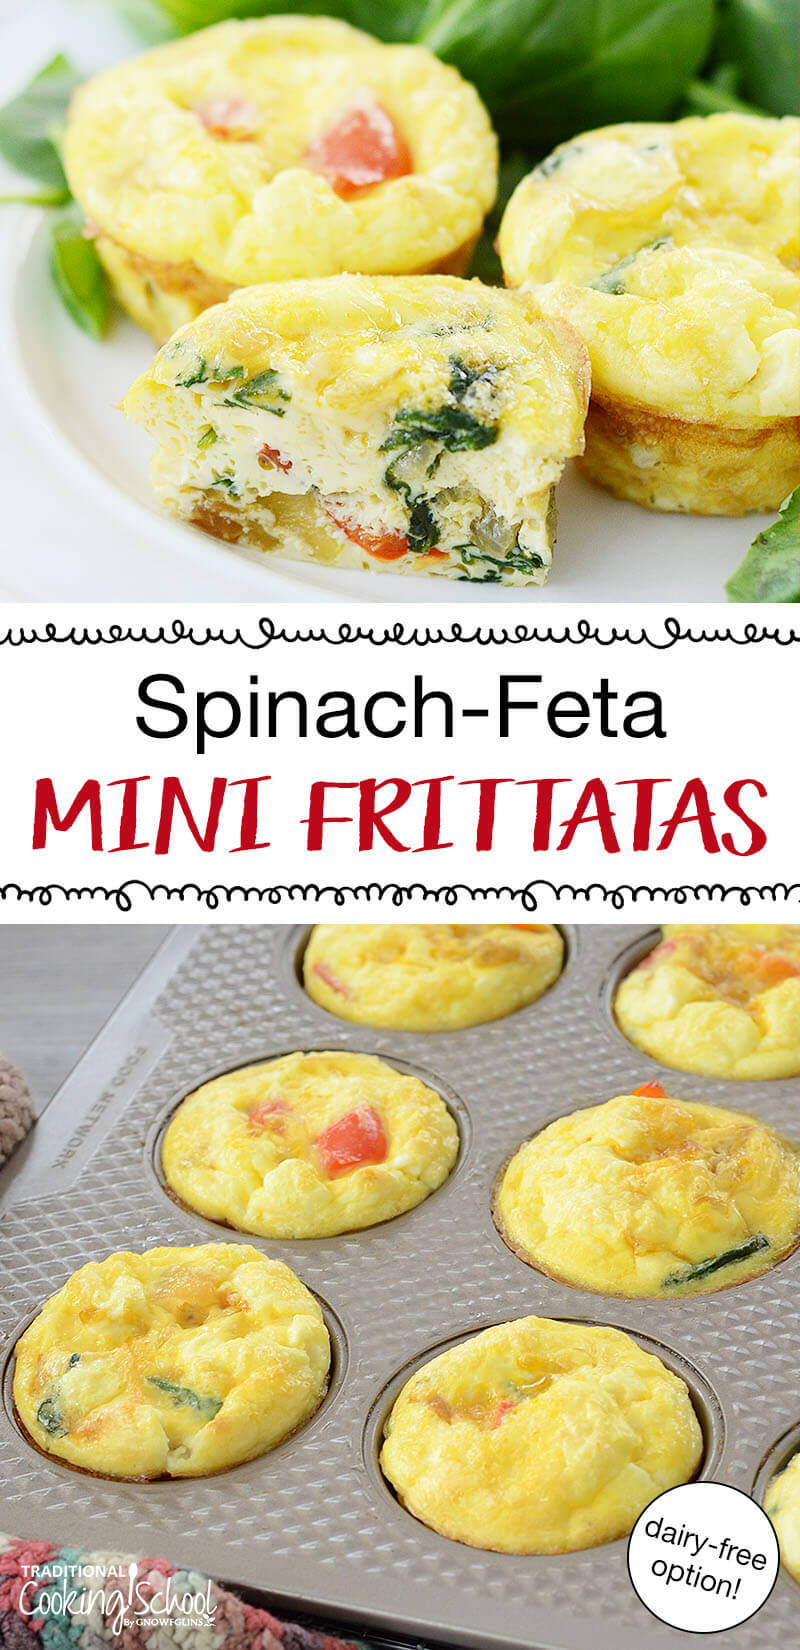 photo collage of egg muffins on a plate and in a muffin tin with text overlay: "Spinach-Feta Mini Frittatas (dairy-free option!)"